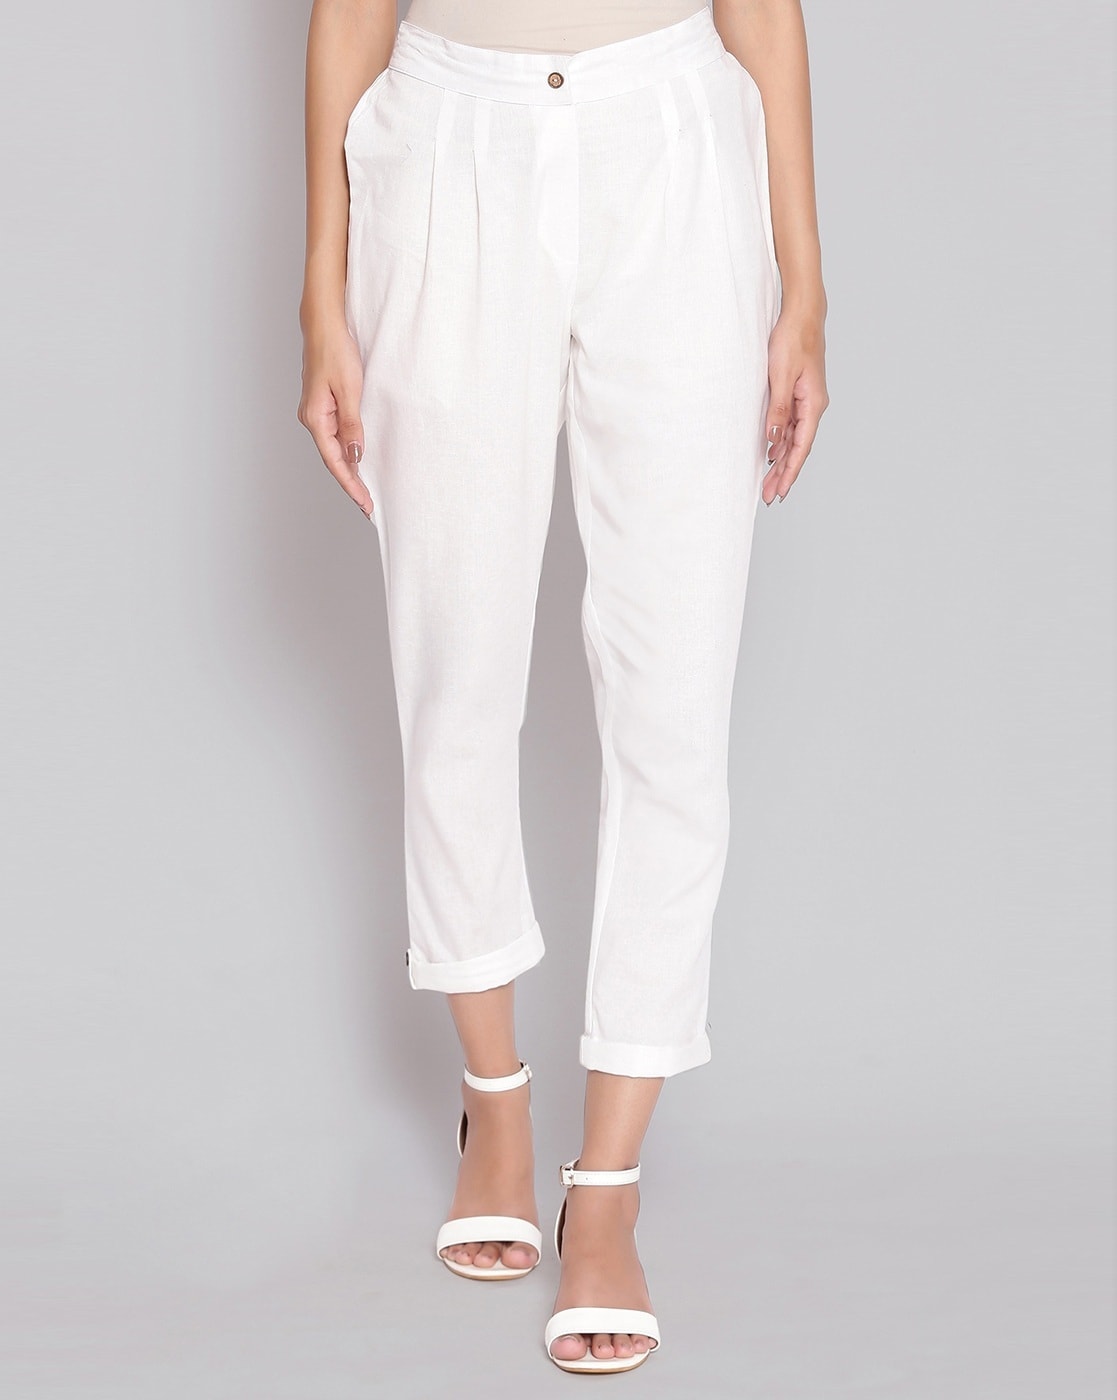 Buy White Pants at Best Price in India  French Crown